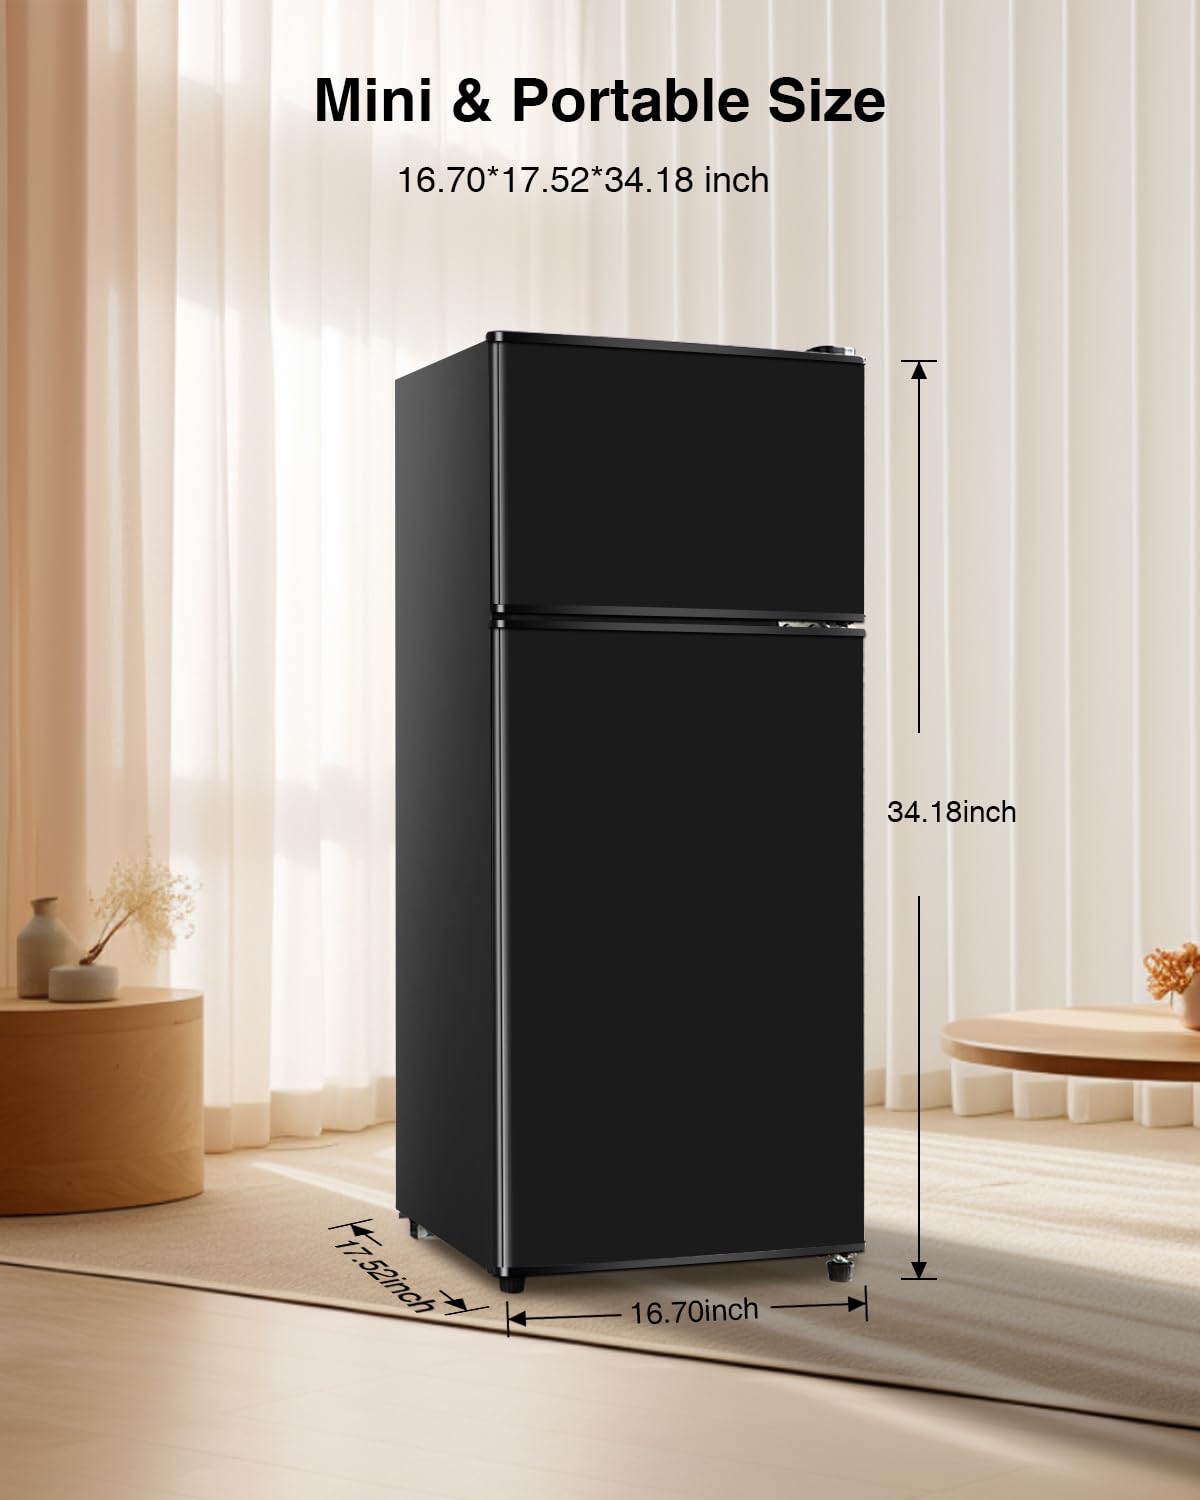 Geekman Mini Fridge with Freezer, 3.5 Cu.Ft Compact Refrigerator with Freezer, 7-level Thermostat & Removable Partition, Low-noise 2 Door Small Fridge for Office, Room, Rv, Corner, Black